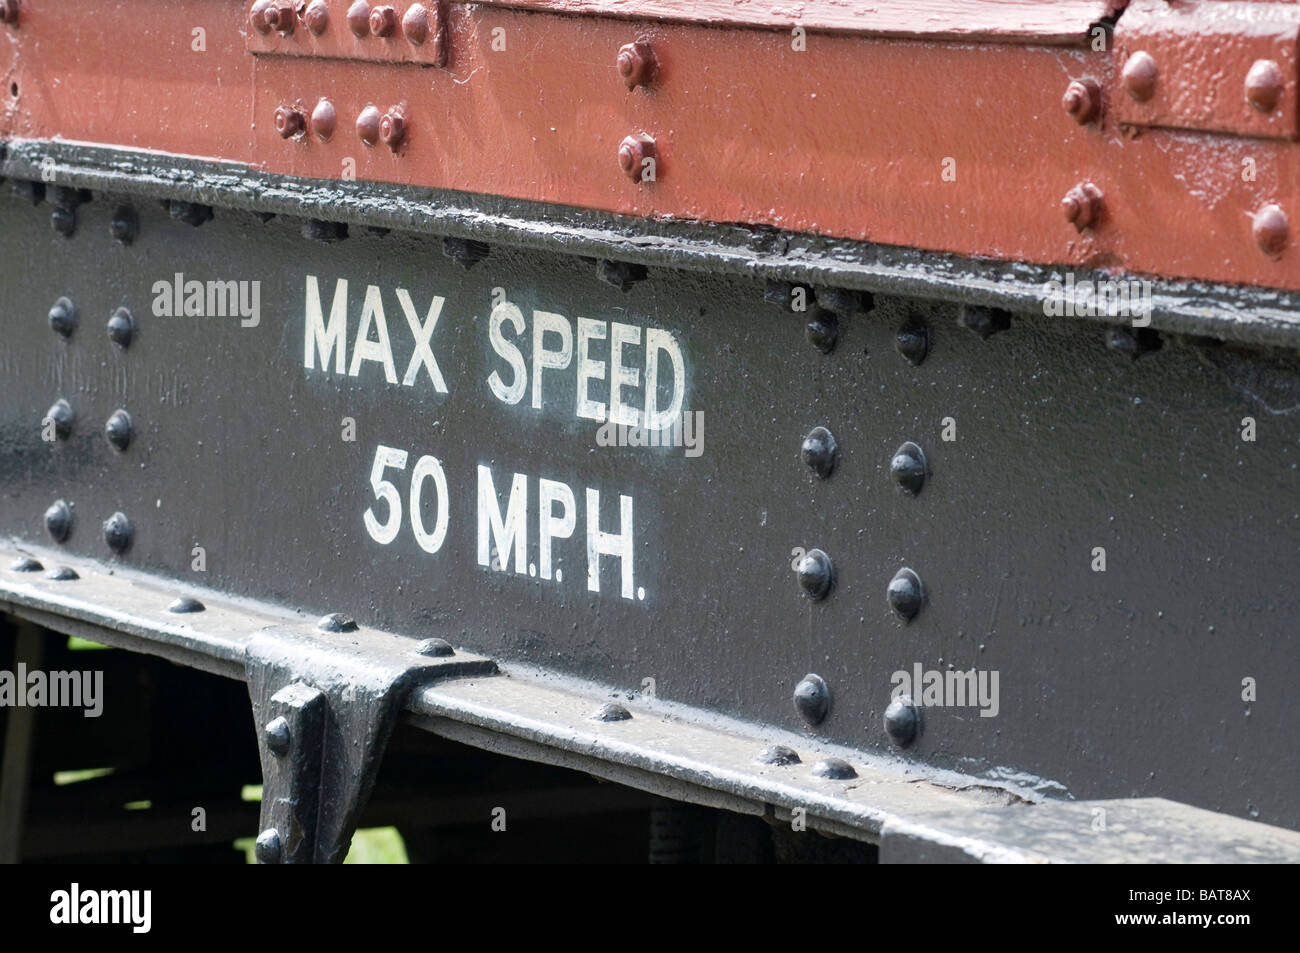 Sign on side of train advising Max Speed 50 MPH Stock Photo